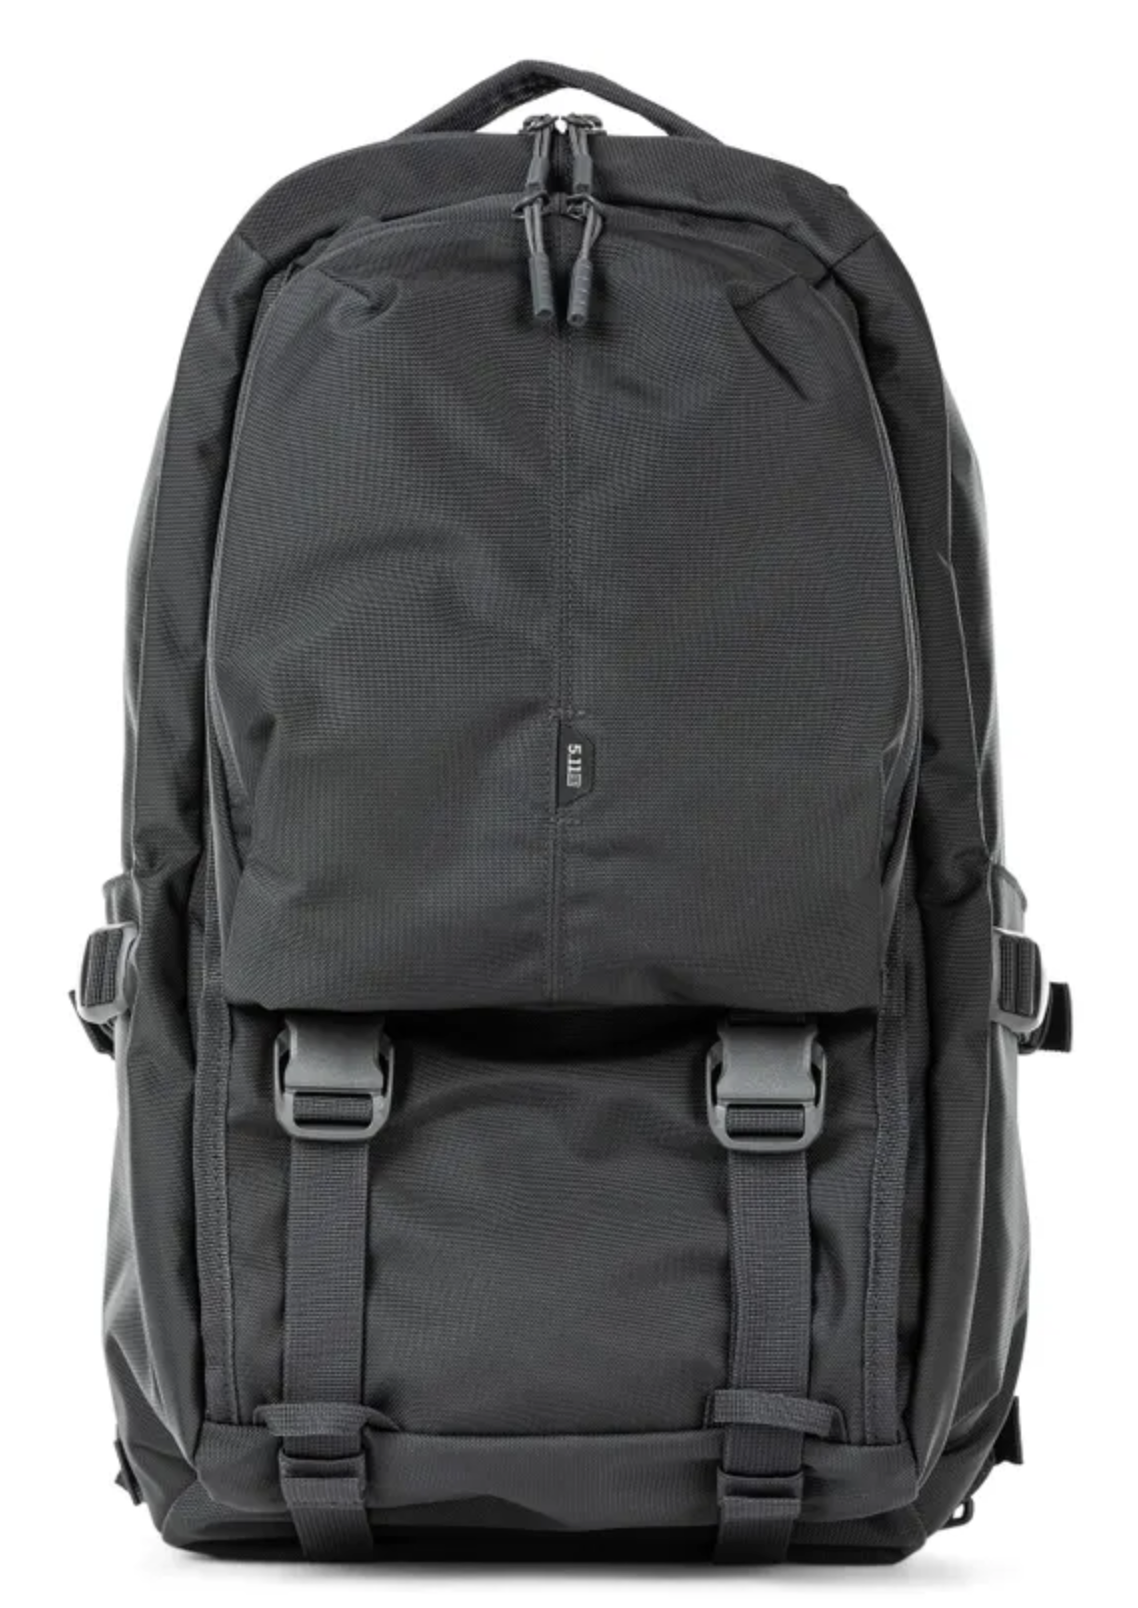 5.11 - LV18 Backpack 2.0 - 30L - Iron Grey (042)